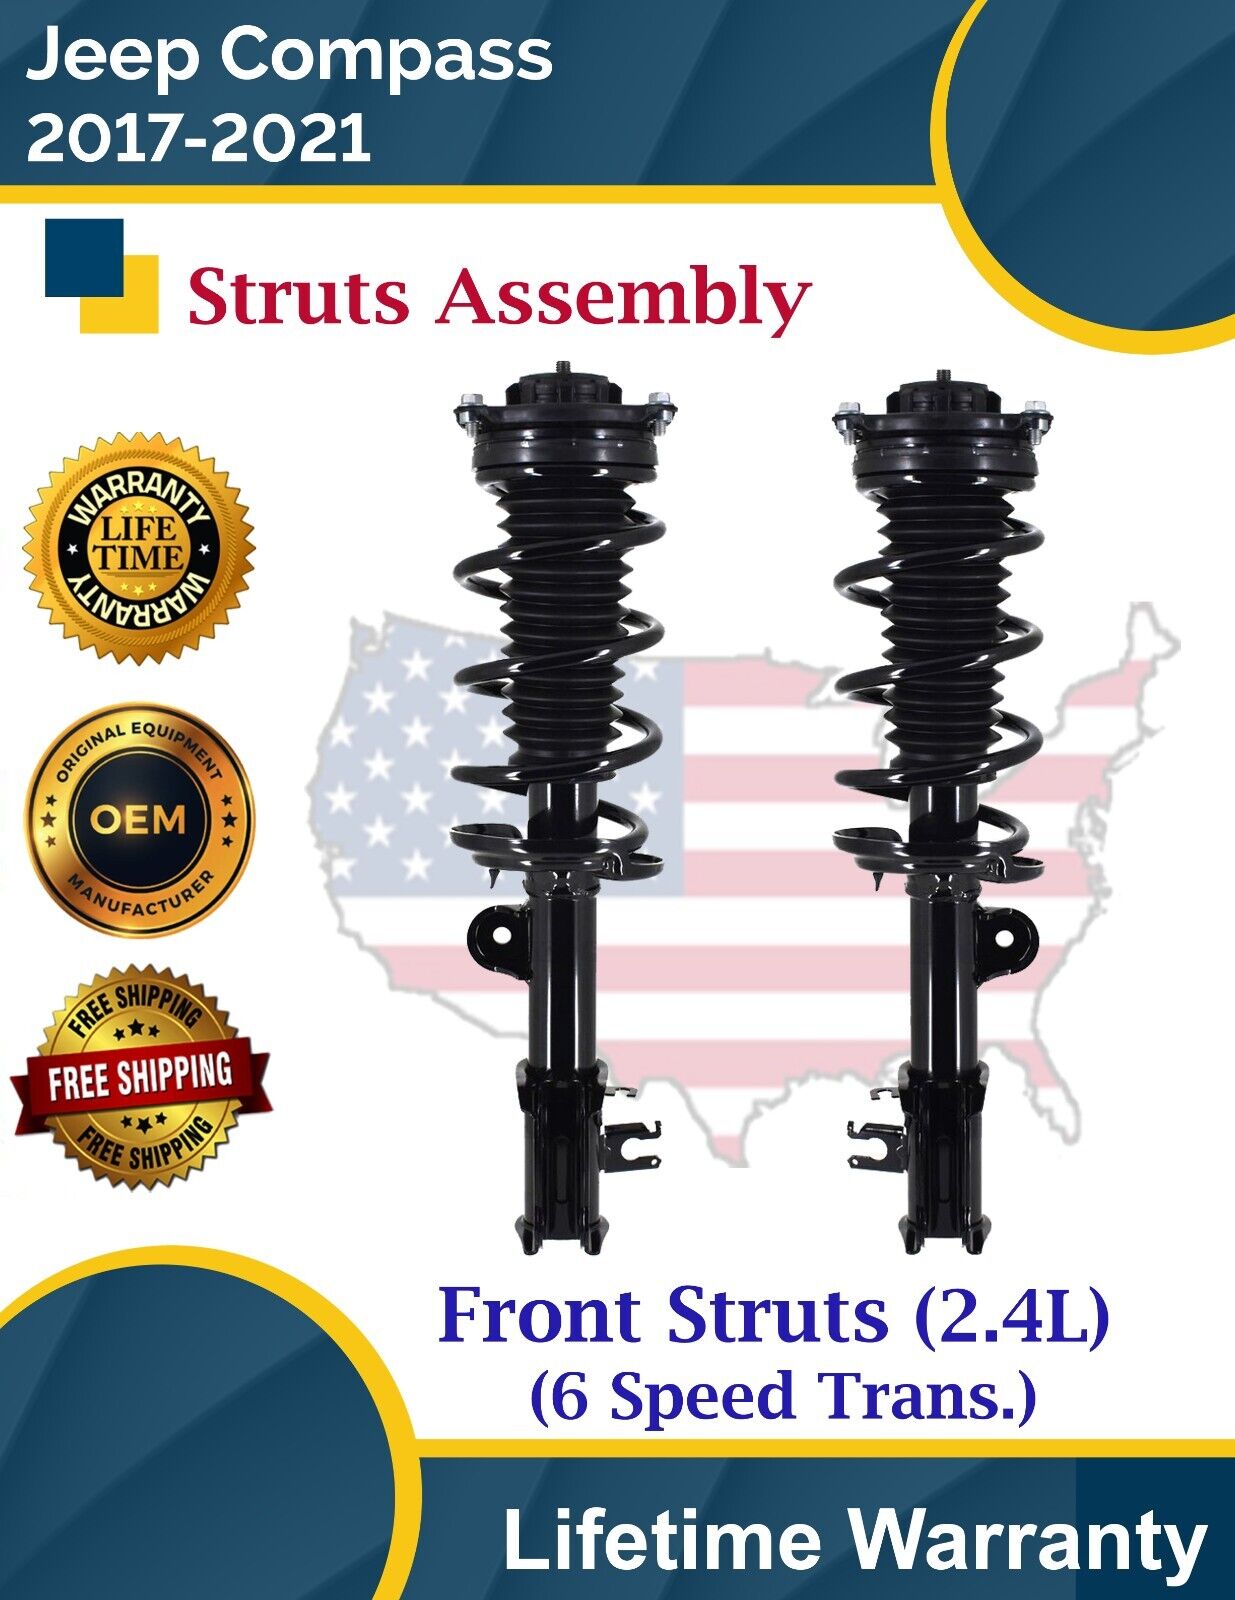 New OE Front Struts For 2017-2021 Jeep Compass 2.4L 6 Speed Lifetime Warranty